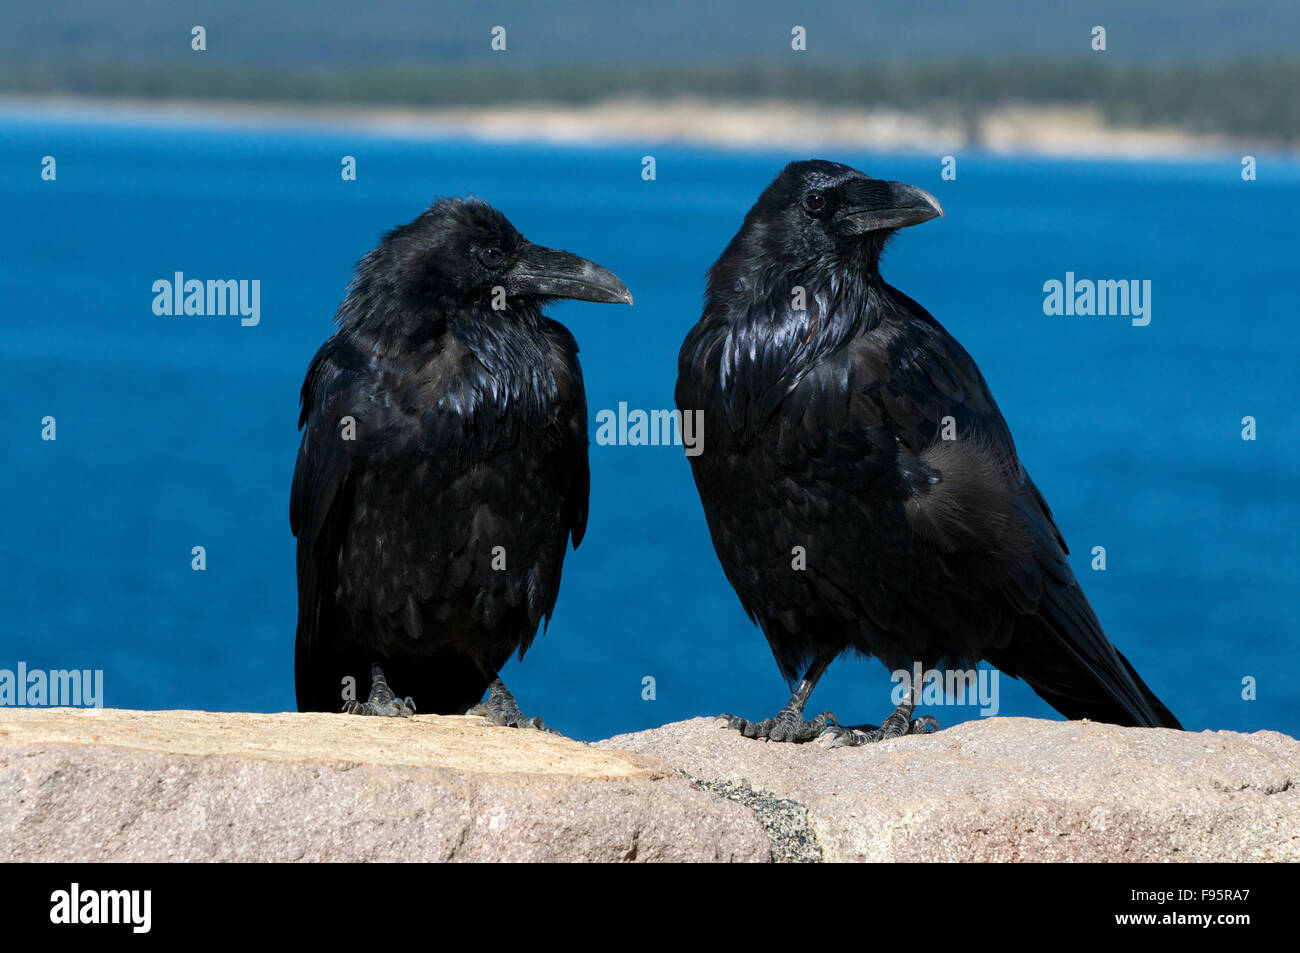 Two Common Ravens perched on rock with lake in the background. (Corvus corax), Yellowstone Nat'l Park, WY, USA. Stock Photo